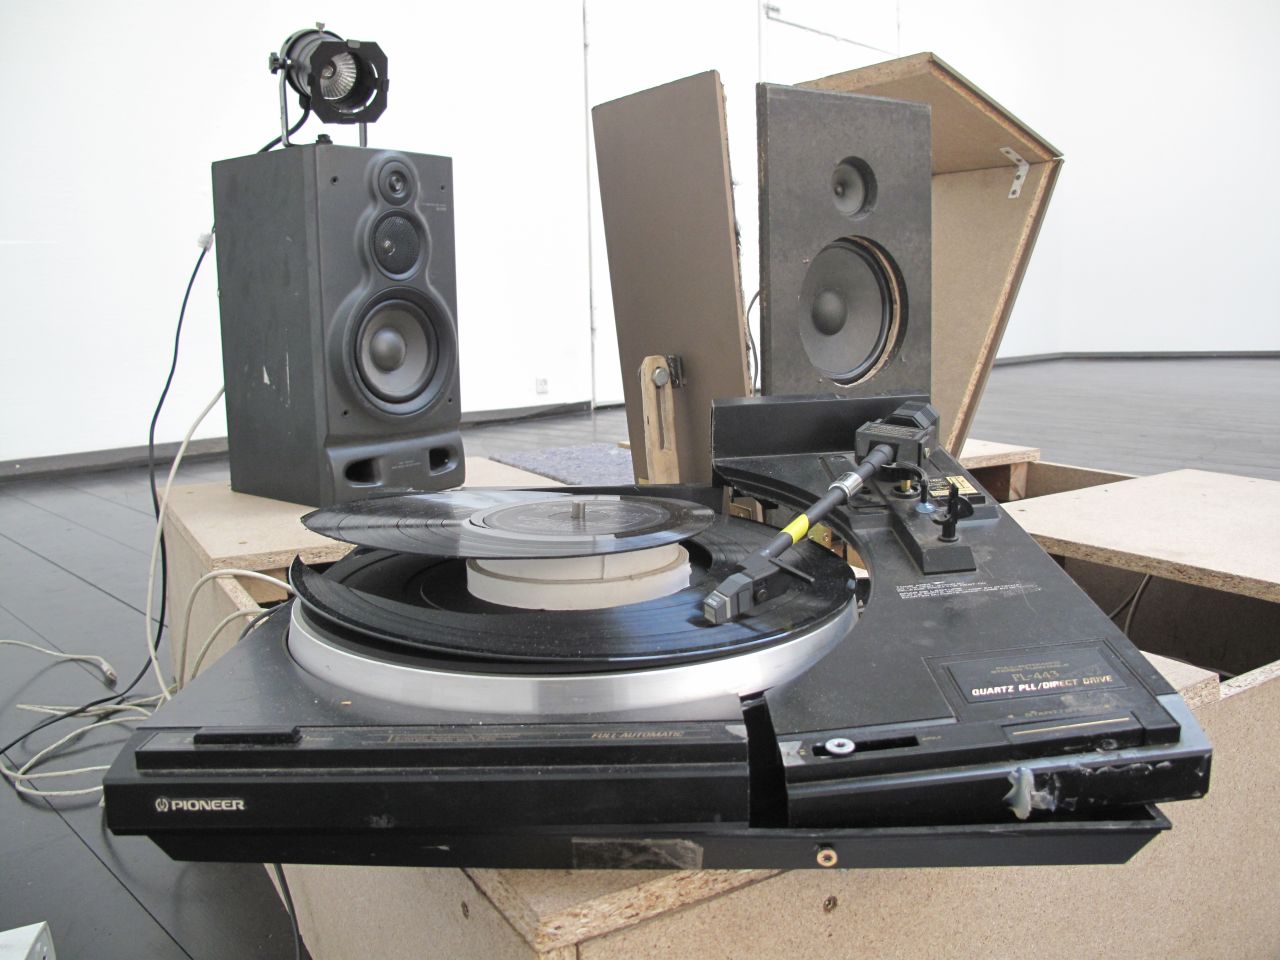 <a href="https://vimeo.com/34338112" target="_blank" target="_blank">Vinyl Terror and Horror</a> -- real names Camilla Sørensen and Greta Christensen -- have hacked the turntables... to pieces. Their scarred, smashed and restitched vinyl create all types of noise, occasionally interrupted by the vinyl's intended soundtrack.